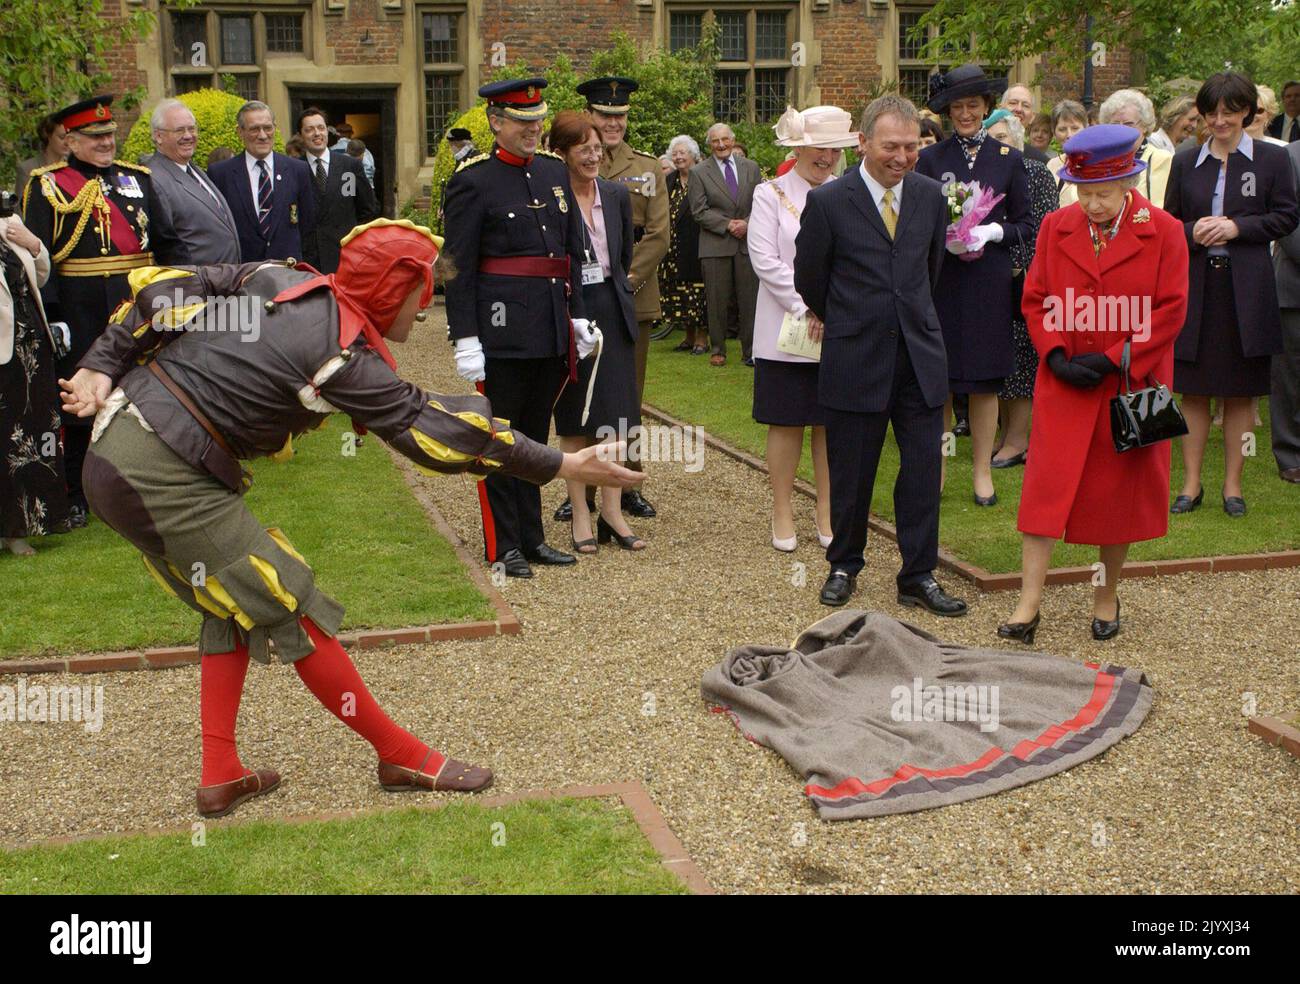 File photo dated 9/5/2002 of Queen Elizabeth II being invited to step on a cape thrown at her feet by an 'Elizabethan fool', alias Peet Cooper, at Eastbury Manor House during her Golden Jubilee visit to East London. The Queen toured the UK during her Golden Jubilee year – but 2002 also saw the death of both her sister and her mother. Doubters had insisted the Golden Jubilee would be a flop – the monarchy was no longer relevant and royalists should at last bow to the republicans, they argued. More than one million people turned out on successive days during the June Bank Holiday weekend to part Stock Photo